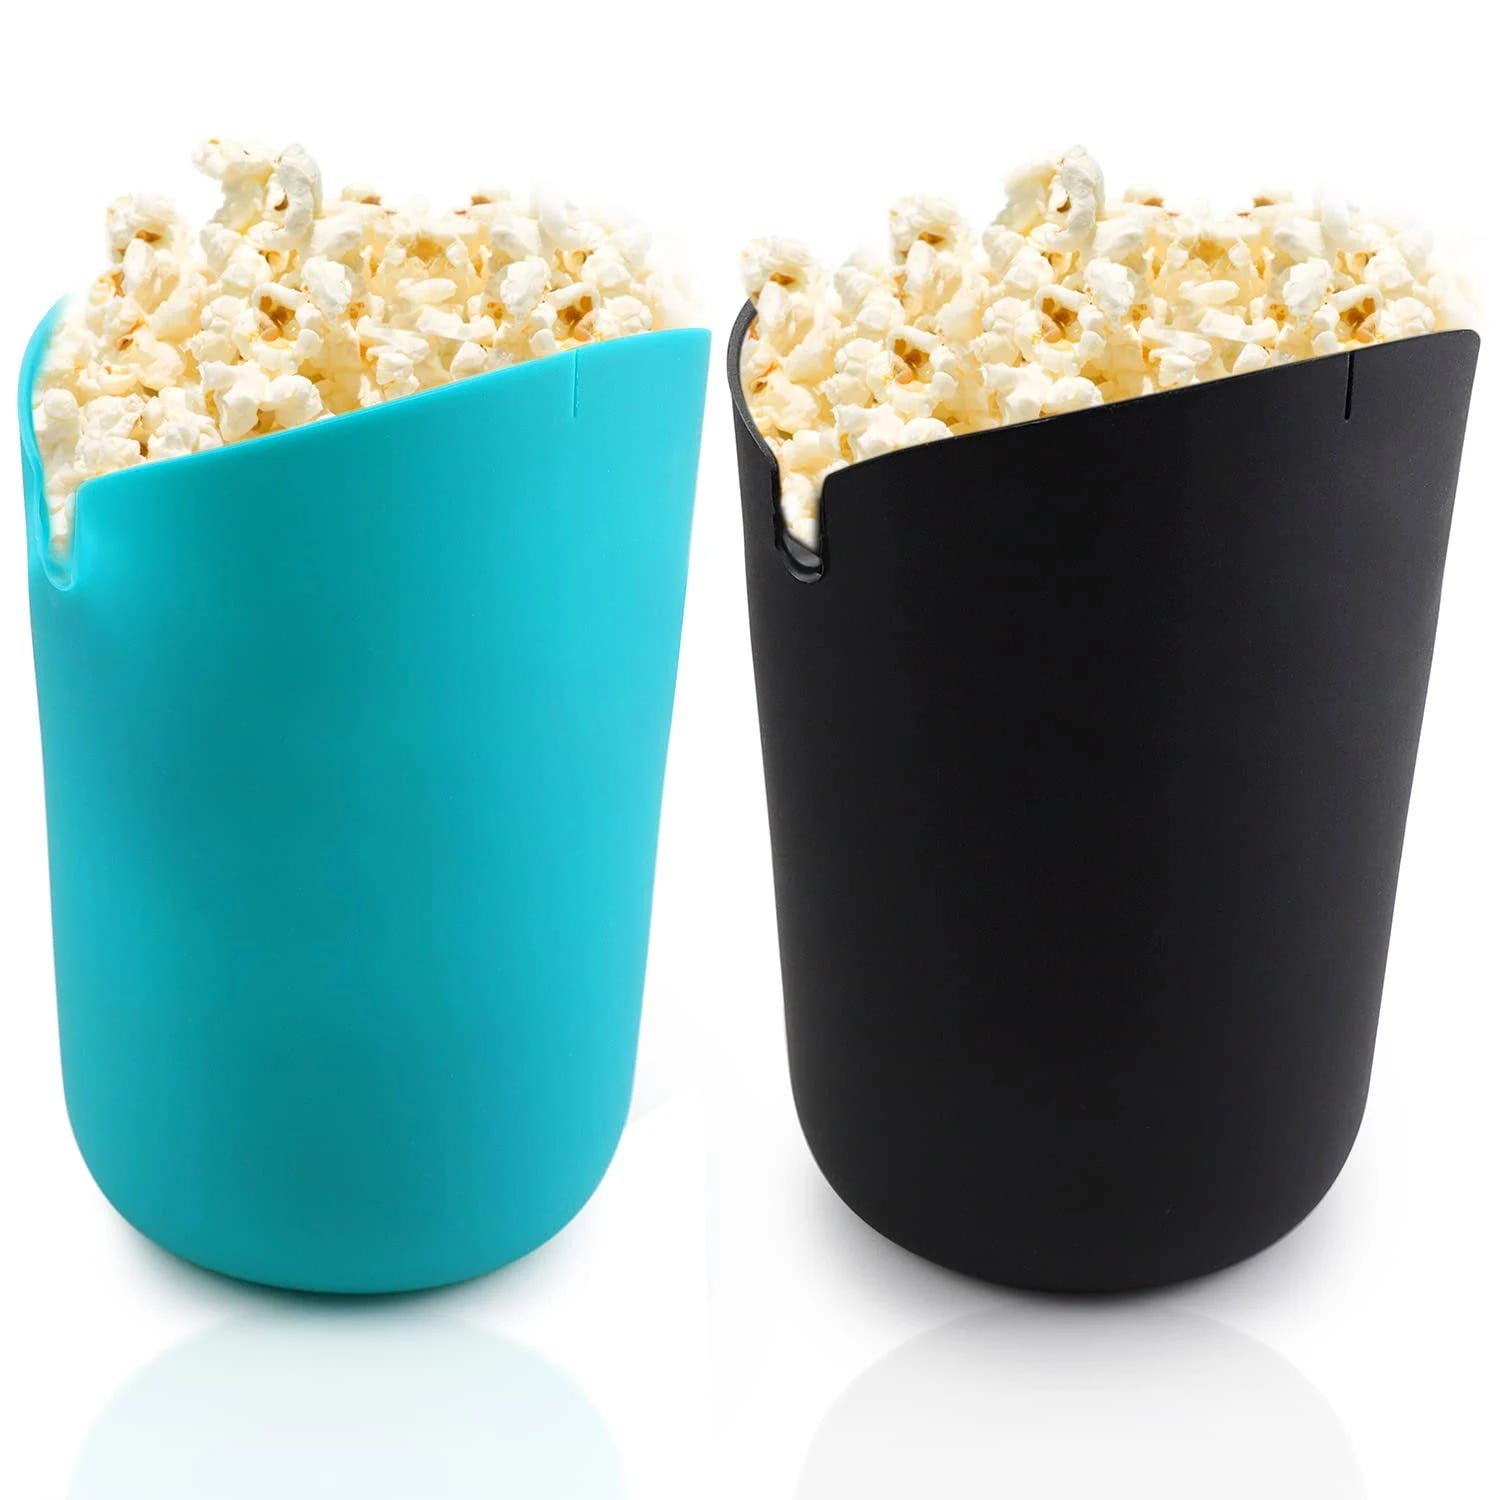 Silicone Microwave Popcorn Popper Maker - Easy and Healthy Popcorn on the Go | Image